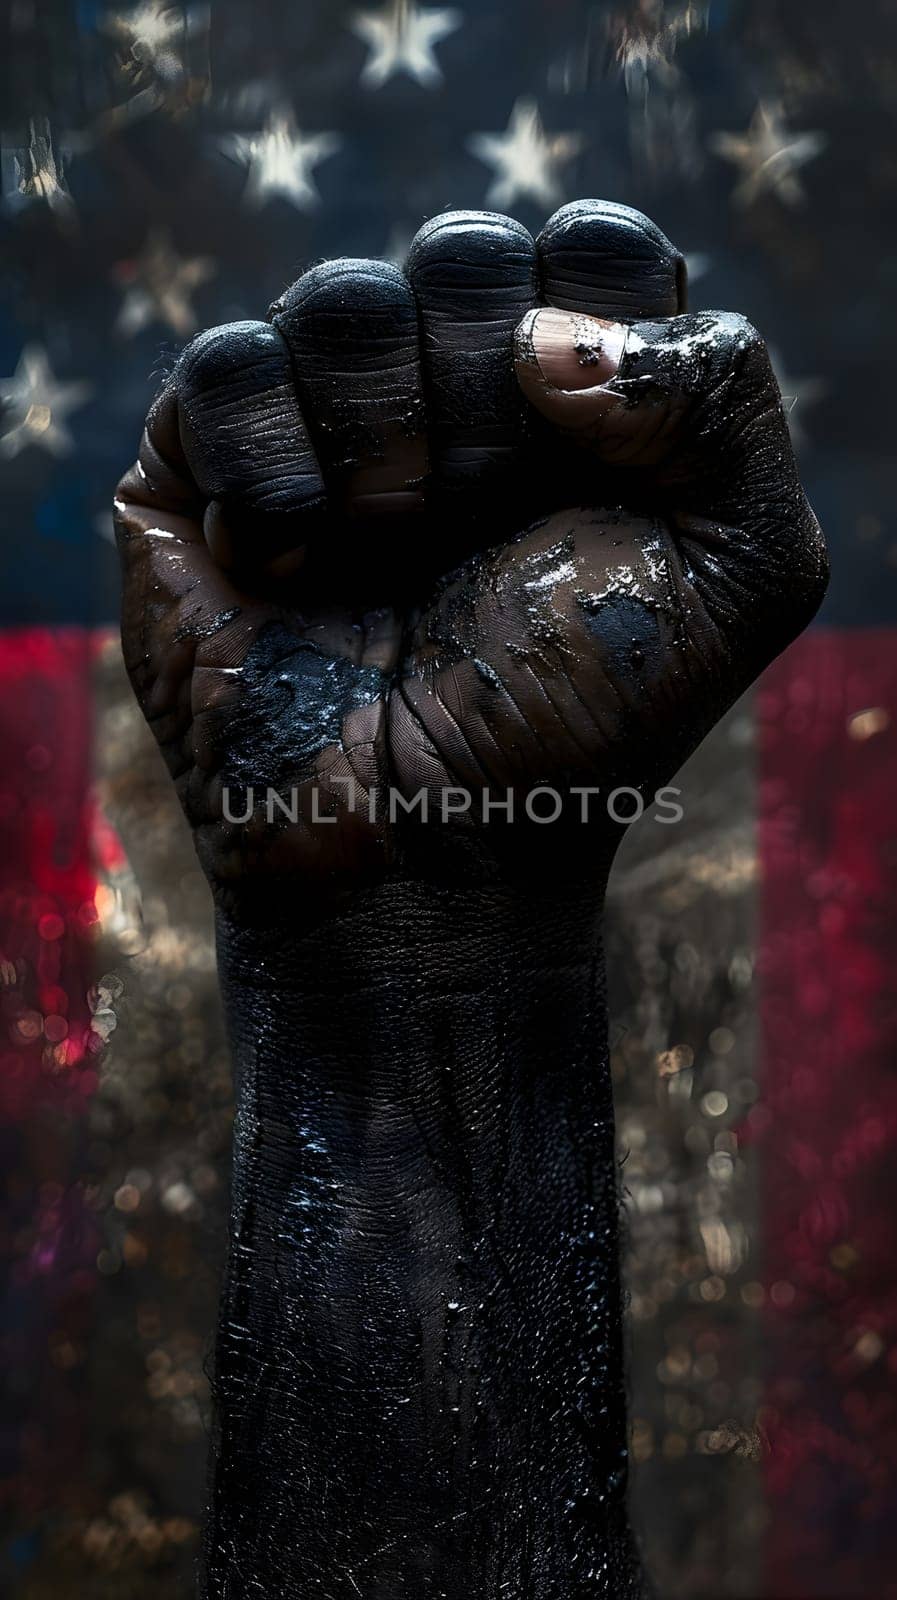 A sculpture of a black primate fist stands in front of an American flag, symbolizing unity and power amidst darkness. The metal artwork showcases the strength of terrestrial animals in the wildlife